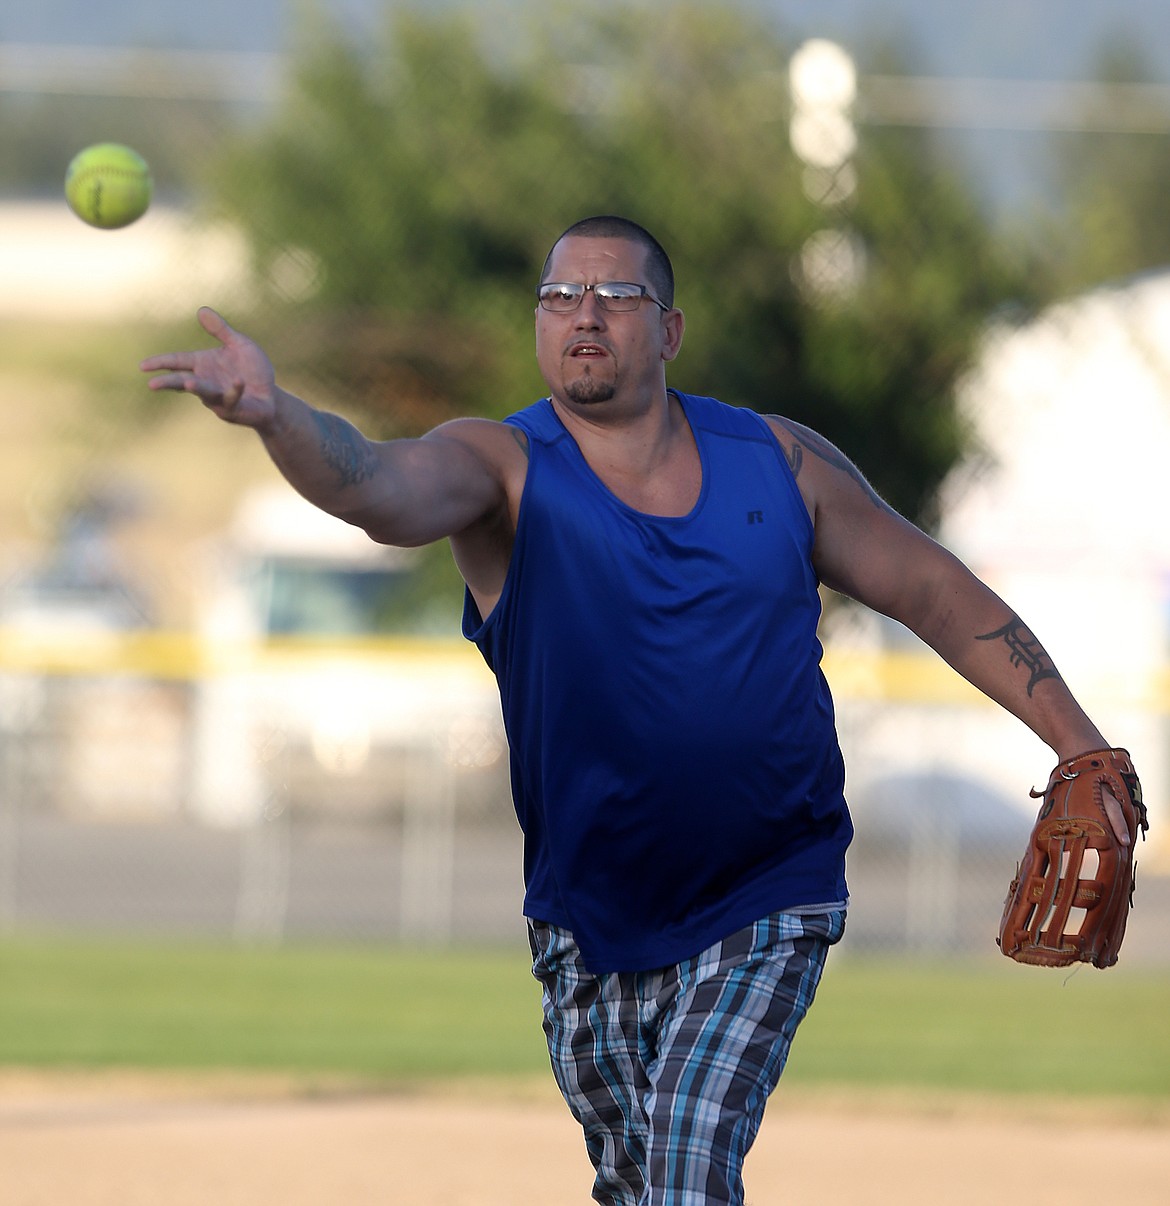 Dilan McCliggott of Kootenai Recovery Center throws a pitch in a rec softball game against Sage Creek Products on Thursday evening at Ramsey Park.